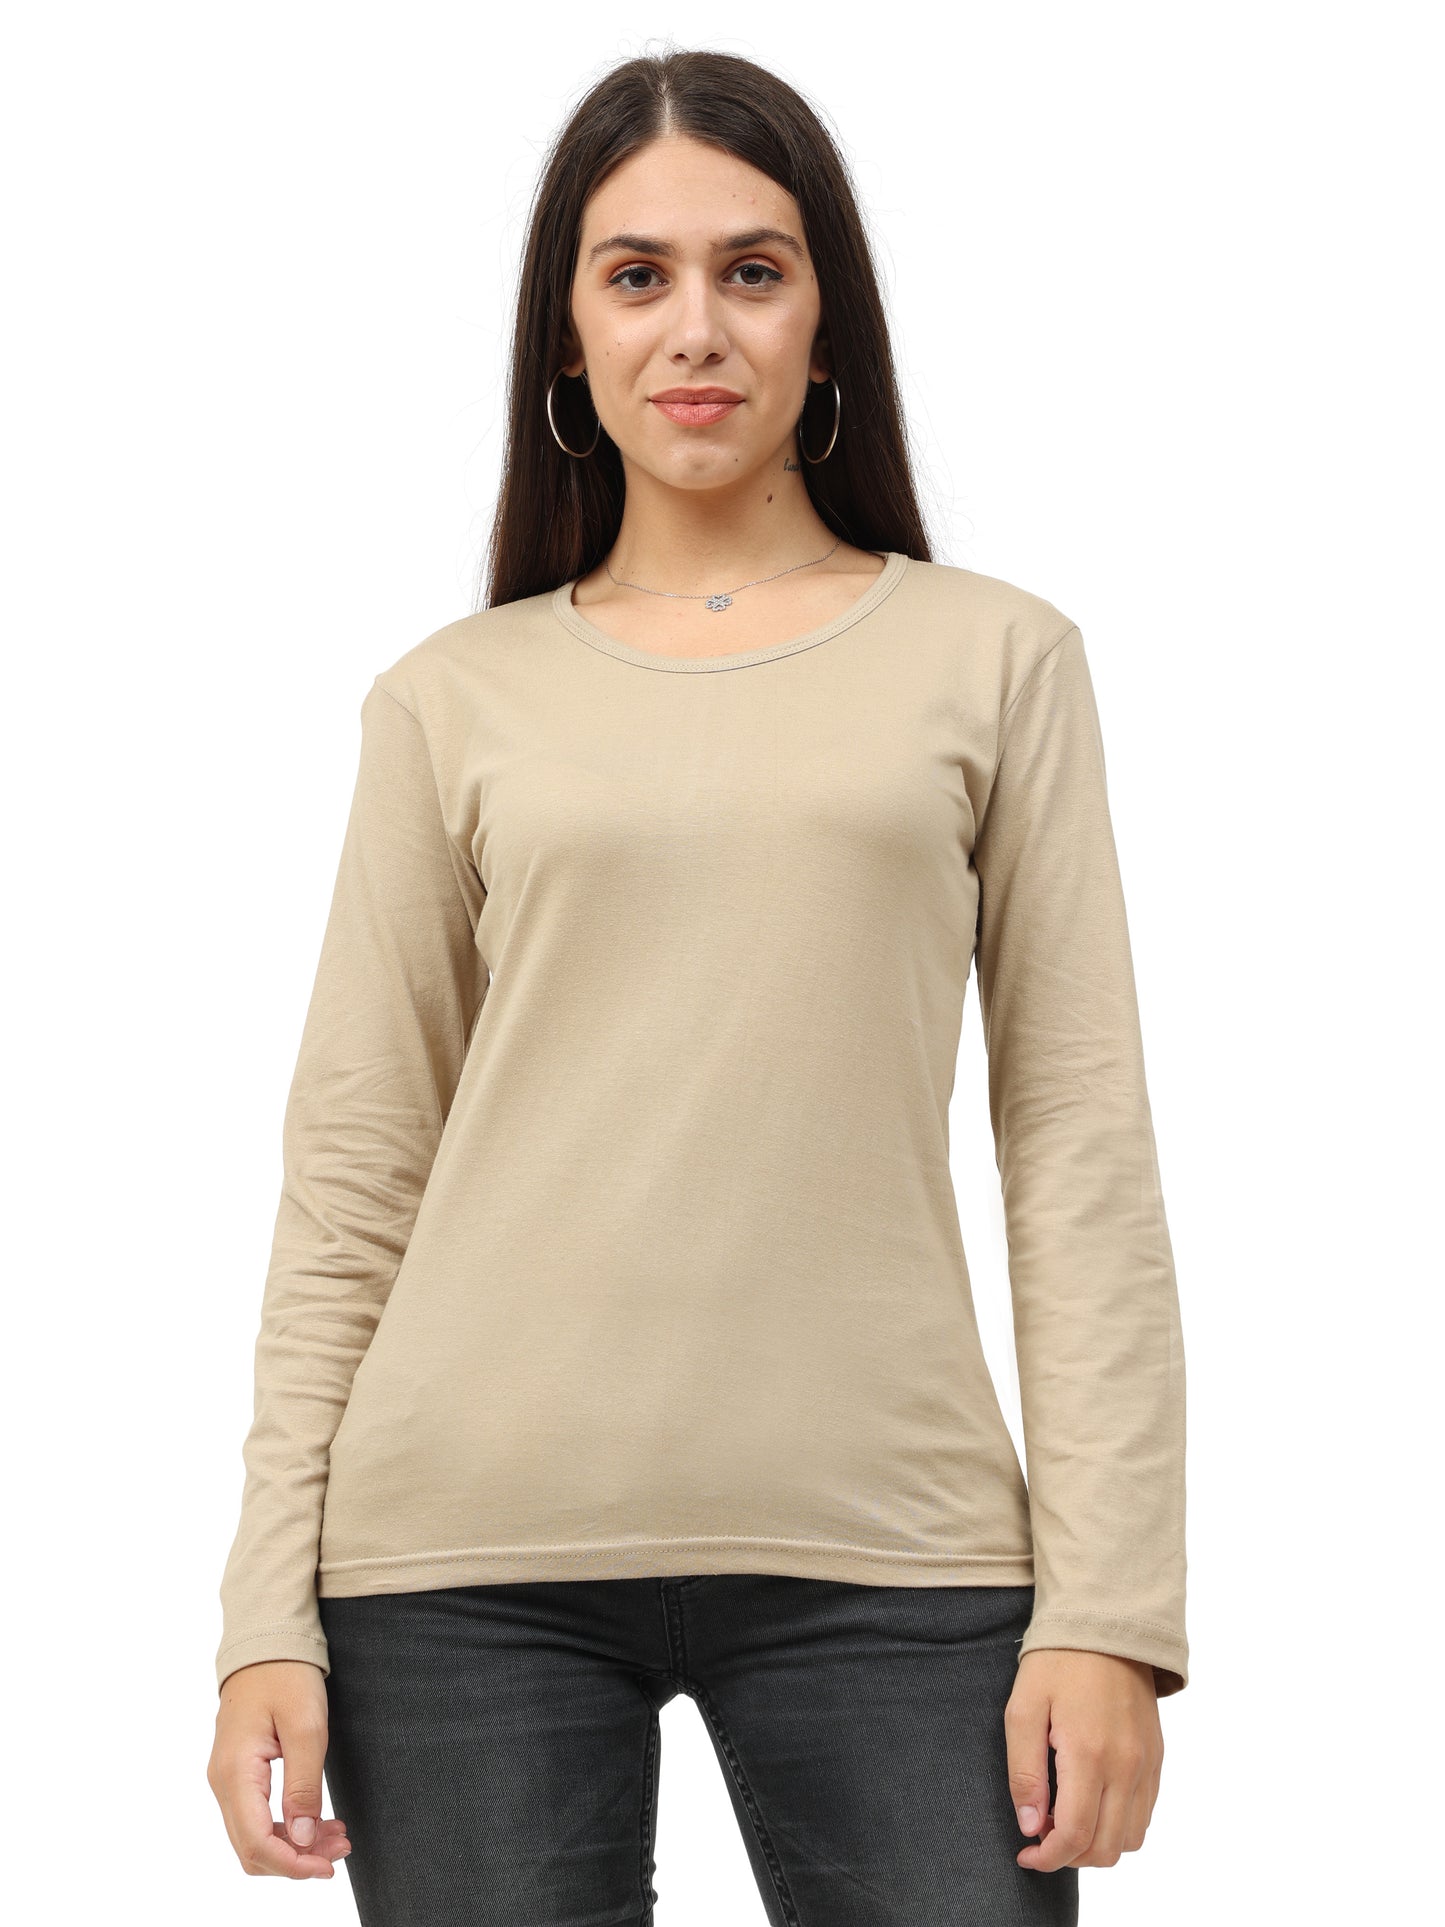 Women's Cotton Plain Round Neck Full Sleeve Biscuit Color T-Shirt